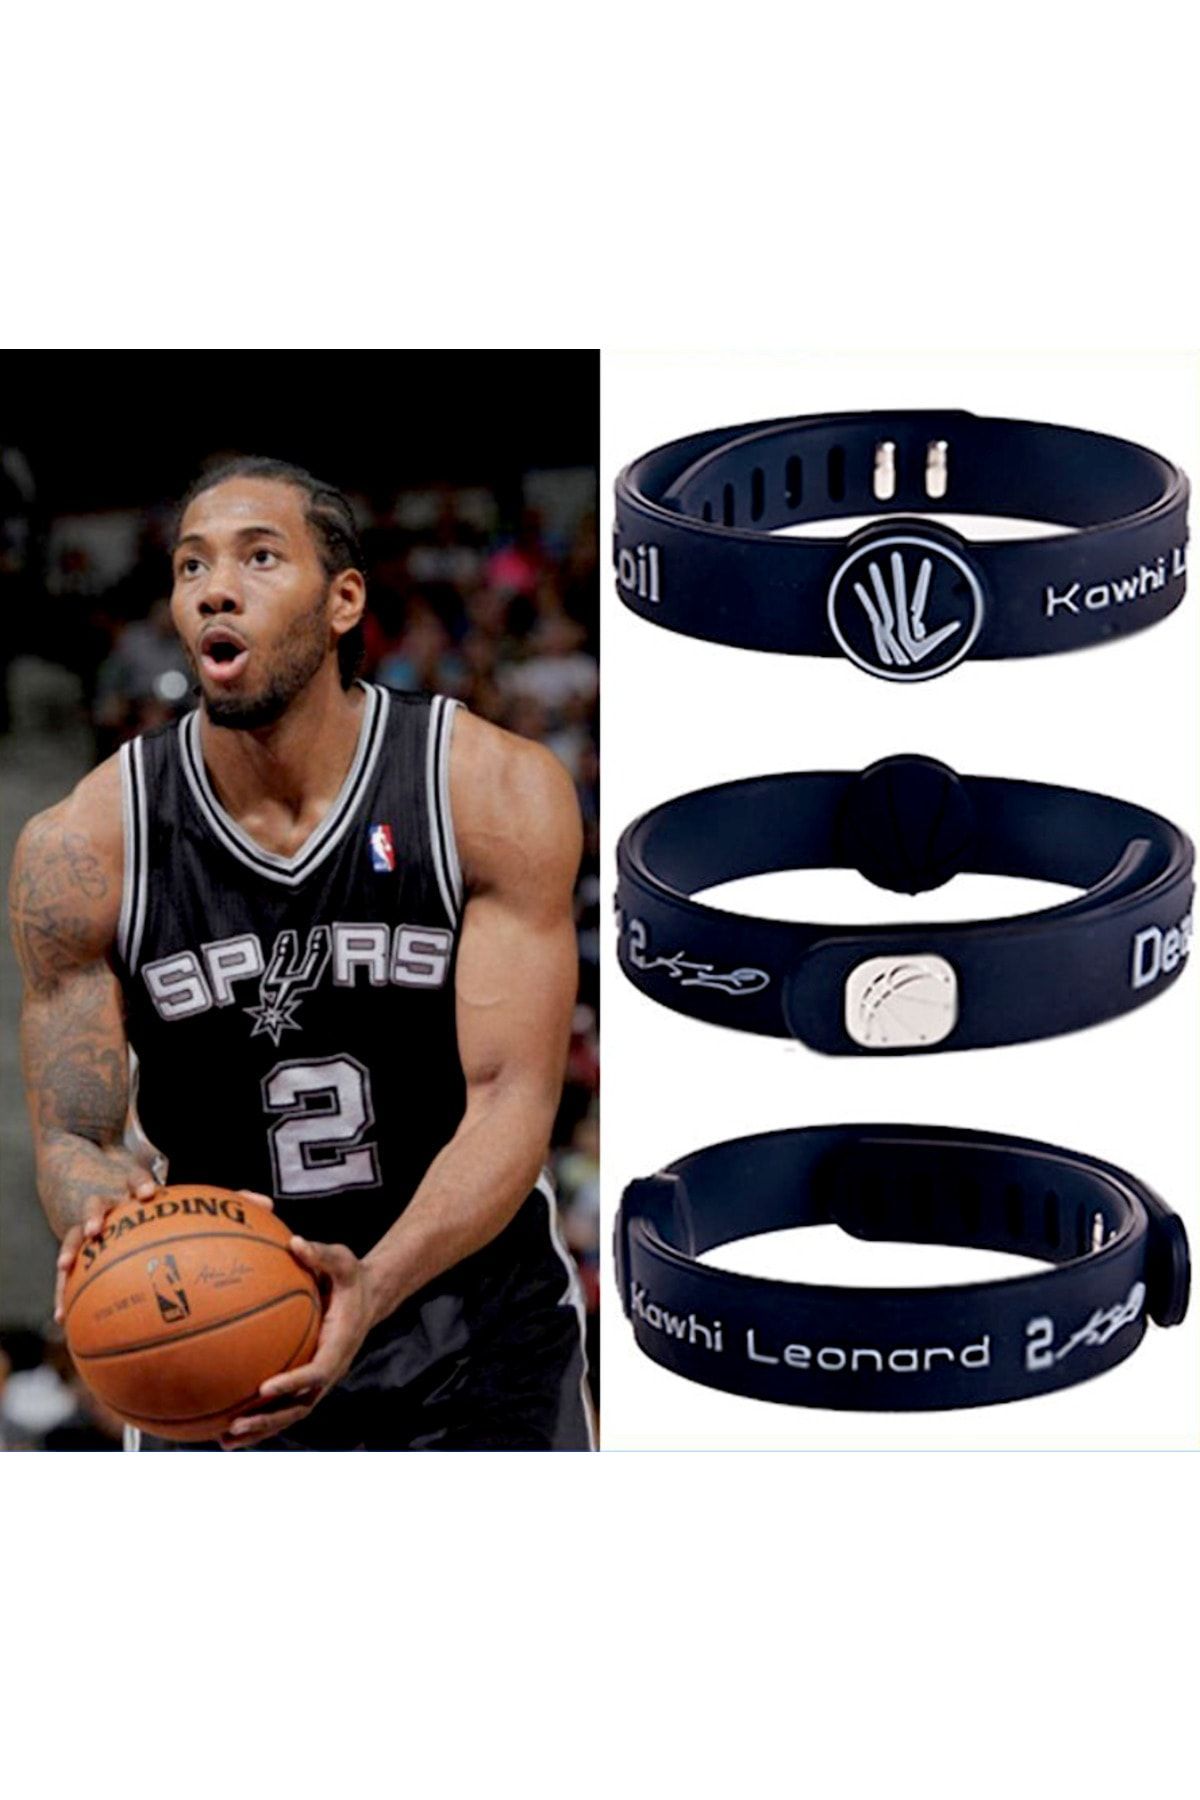 HMWIWAR Basketball Silicone-Bracelet Basketball-Star Keychain, Sports Star  Signature Rubber Wristbands Gifts for Boys & Men | Keychain, Gifts for  boys, Wristbands men